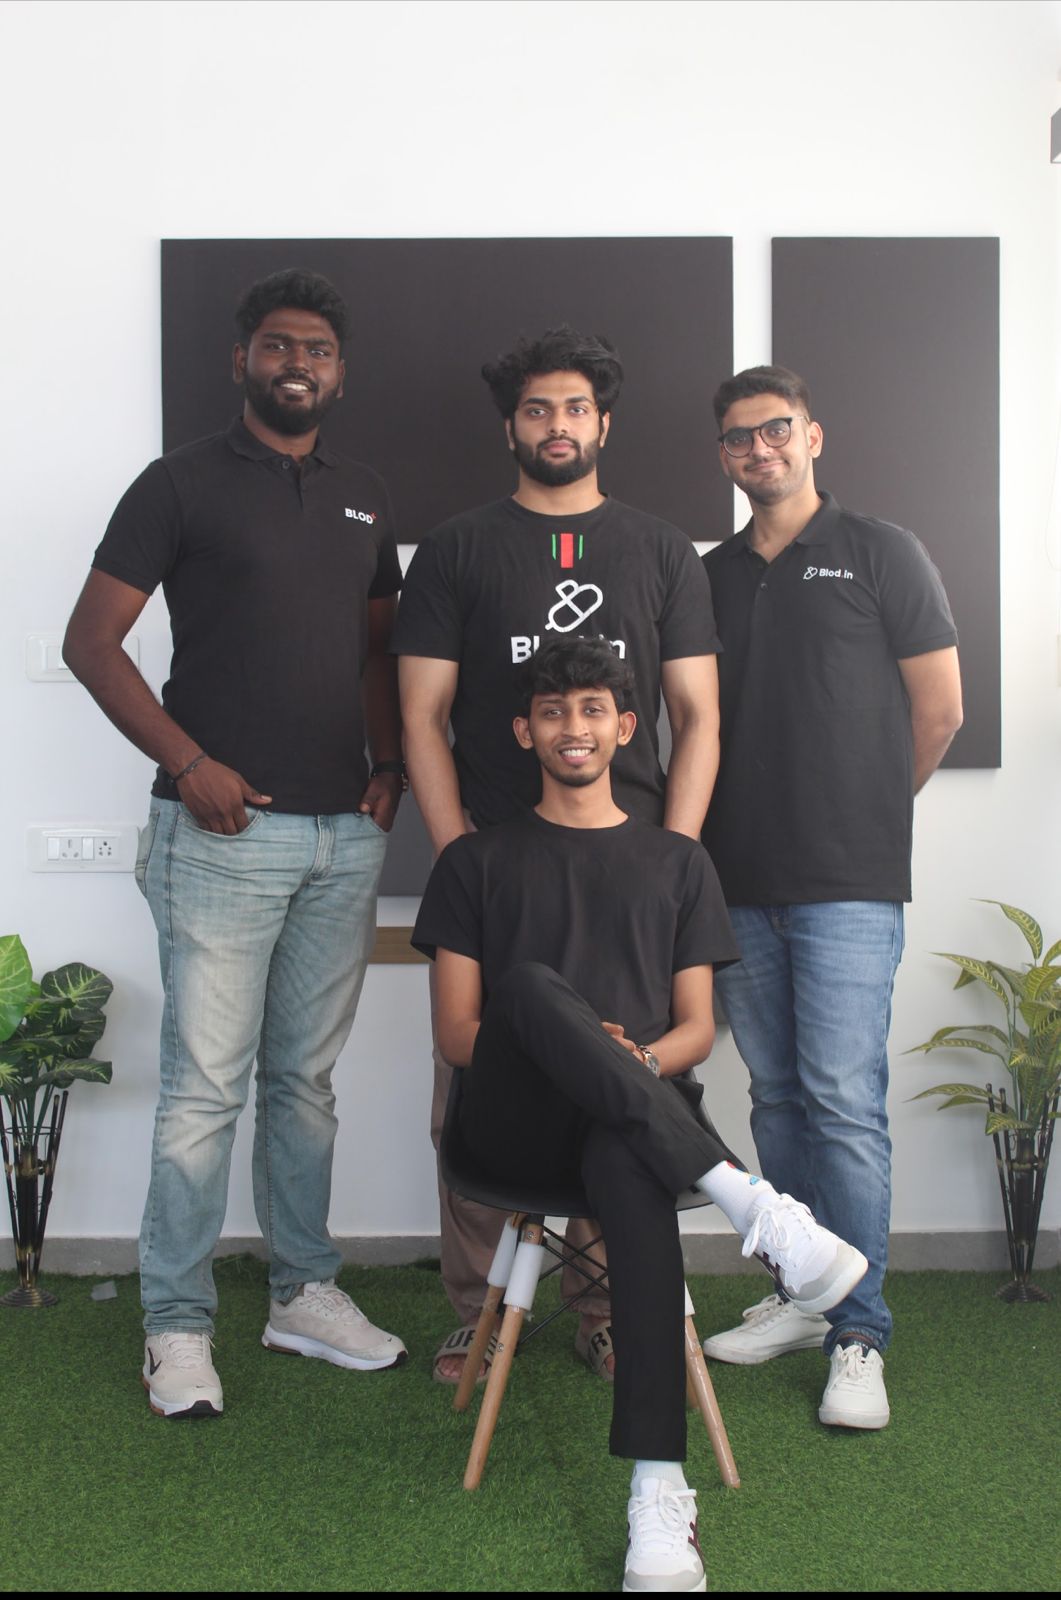 Blod.in Launches Blod+: India’s First On-Demand Blood Logistics Platform for Hospitals and Blood Banks